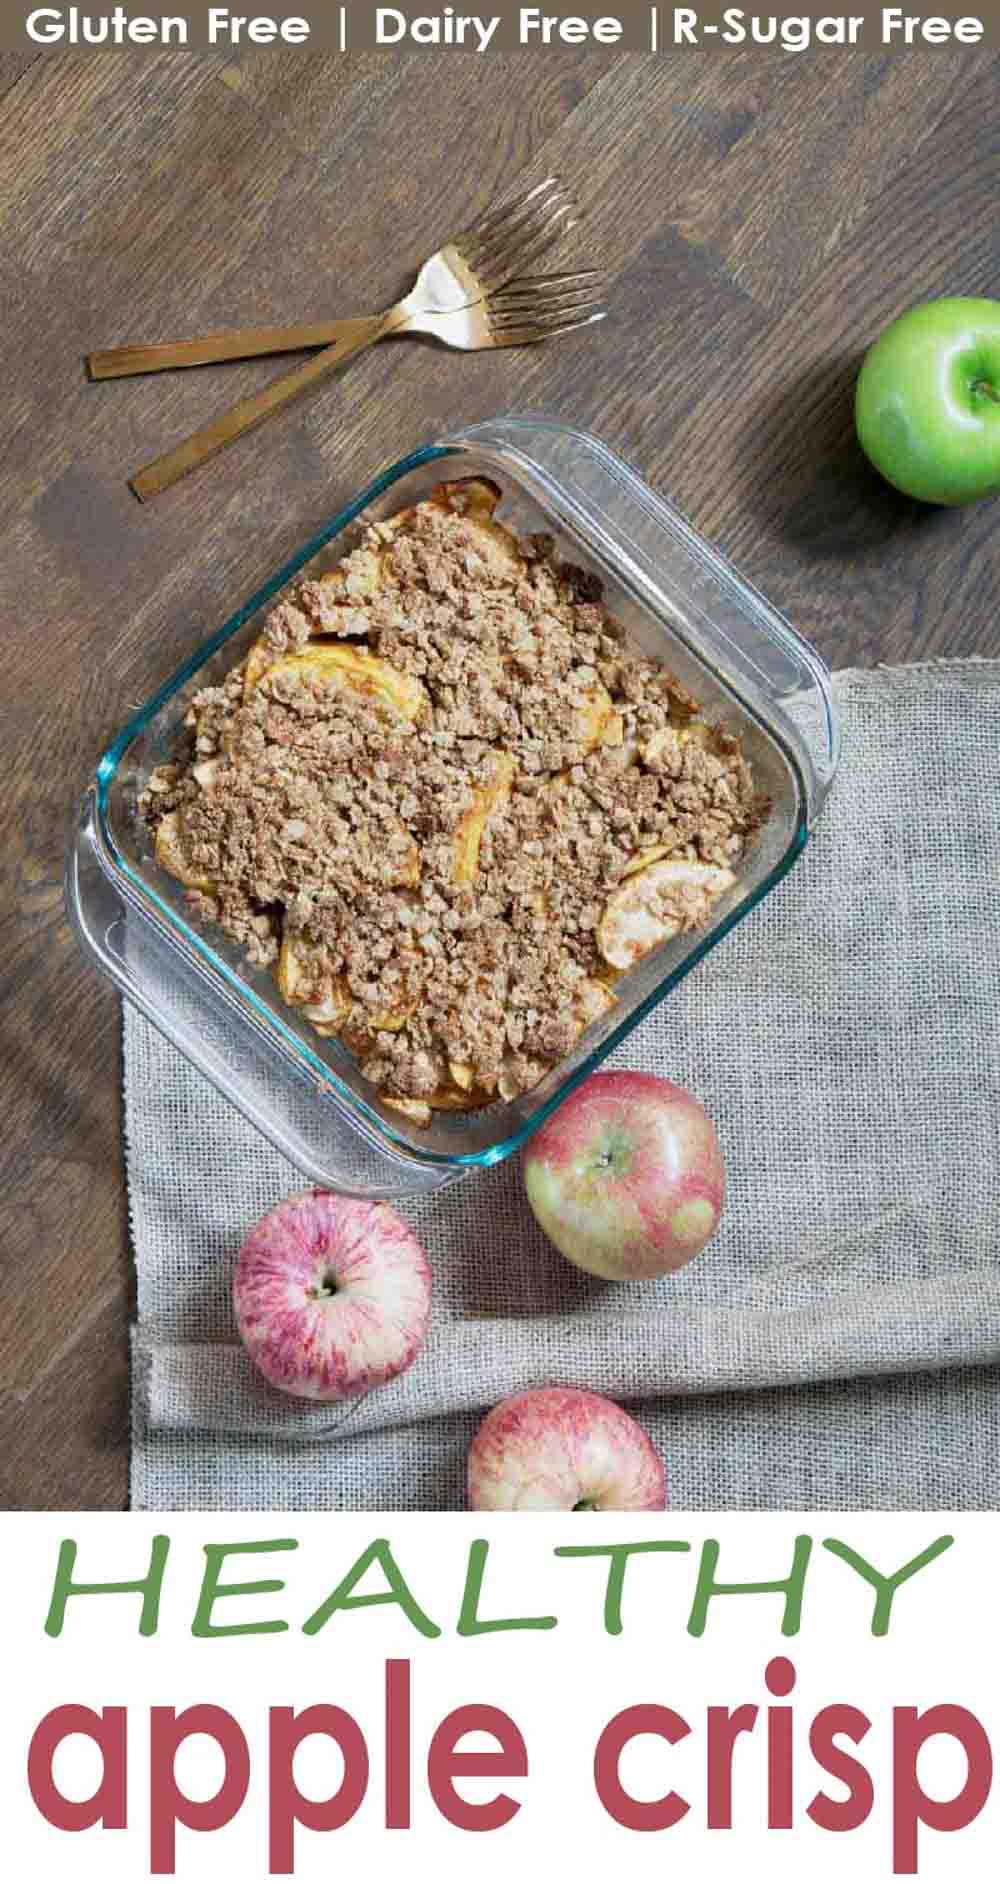   A healthy twist on a classic dessert: this gluten free apple crisp is made from nutritious real foods and nationally sweetened, perfect for health-conscience, dairy free, sugar free or vegan friends!